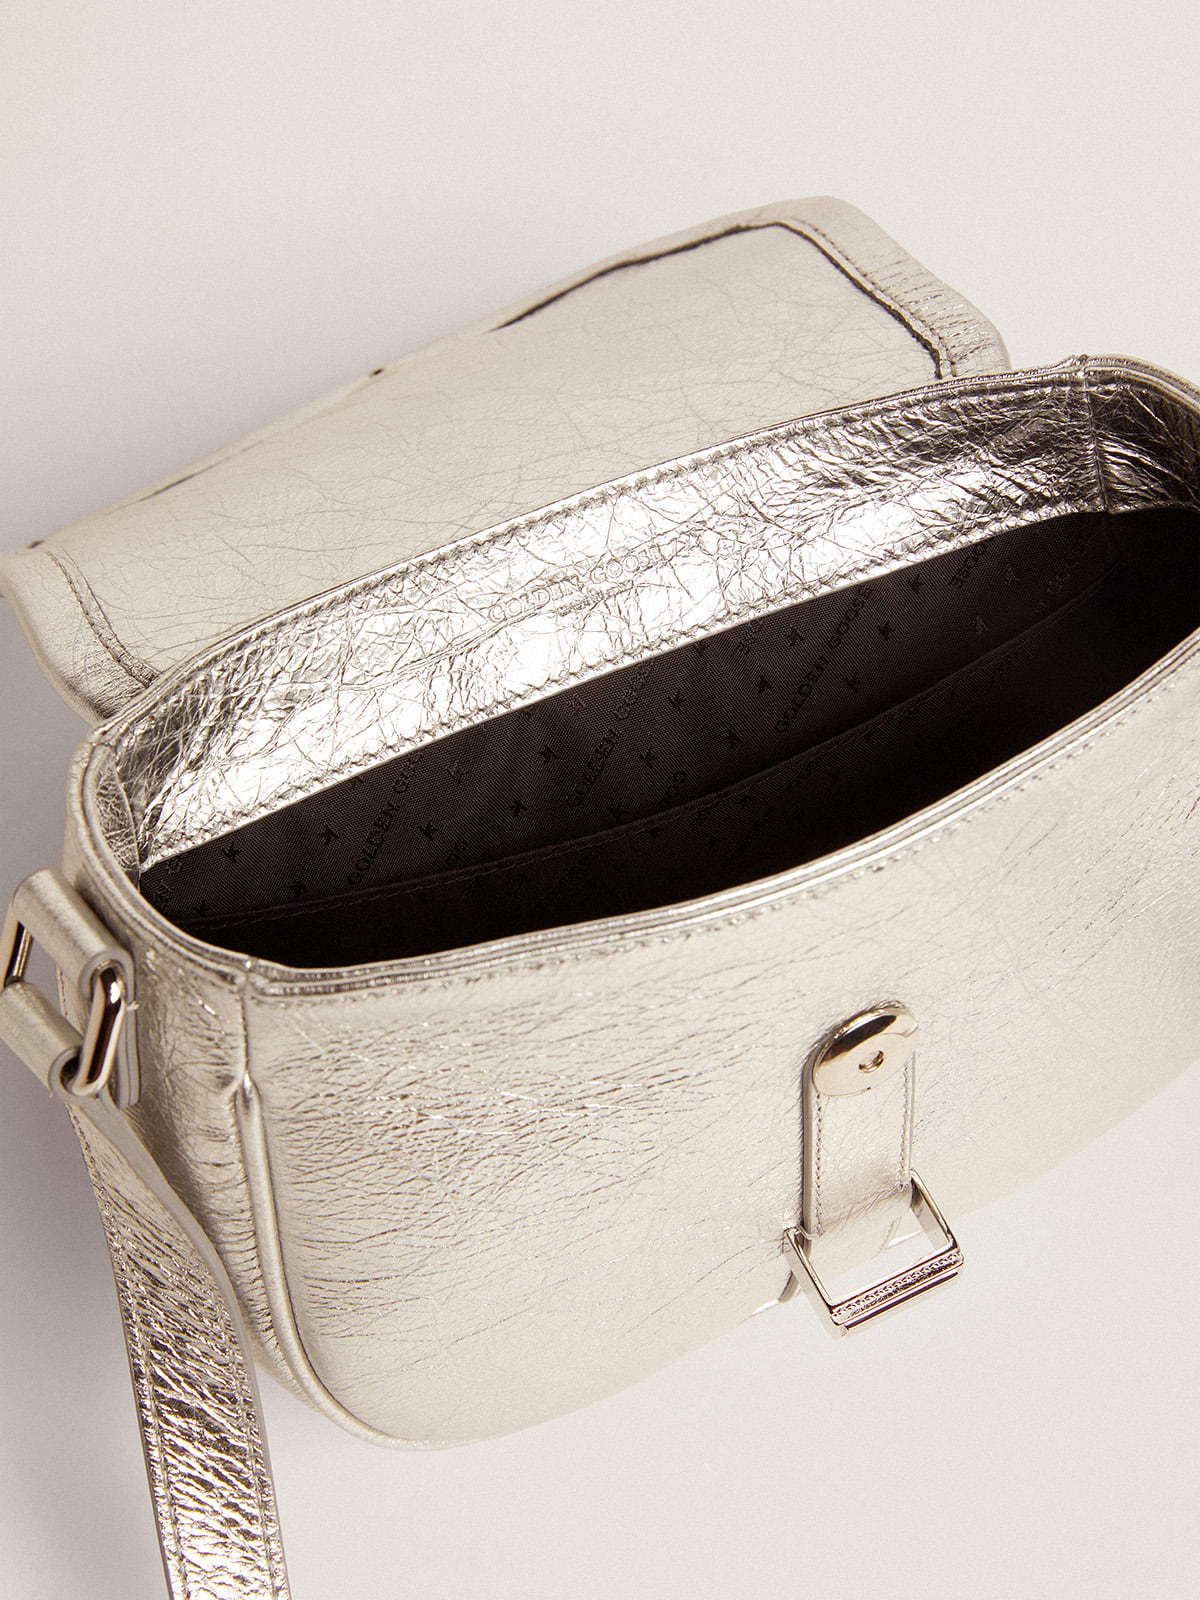 Golden Goose - Women's small Rodeo Bag in silver laminated leather in 